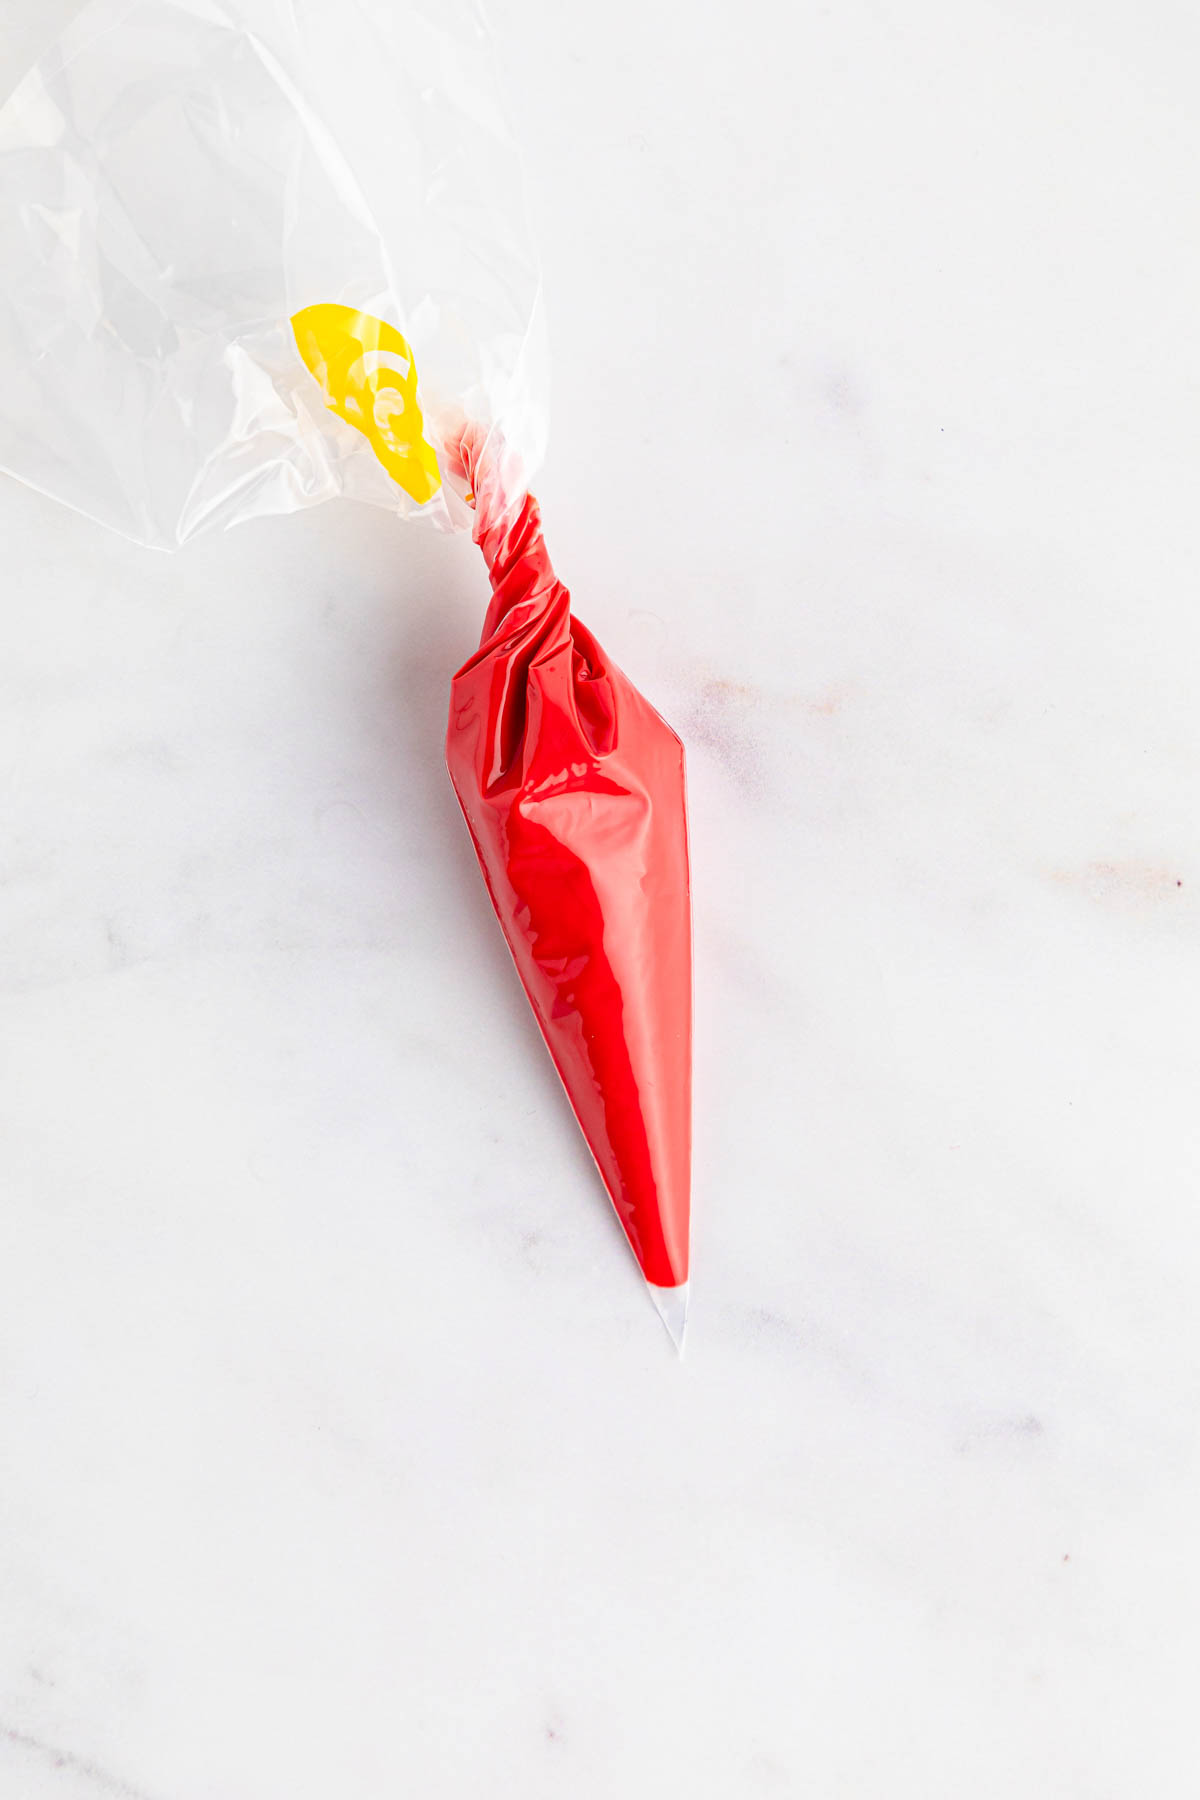 Red candy melts in a plastic bag.